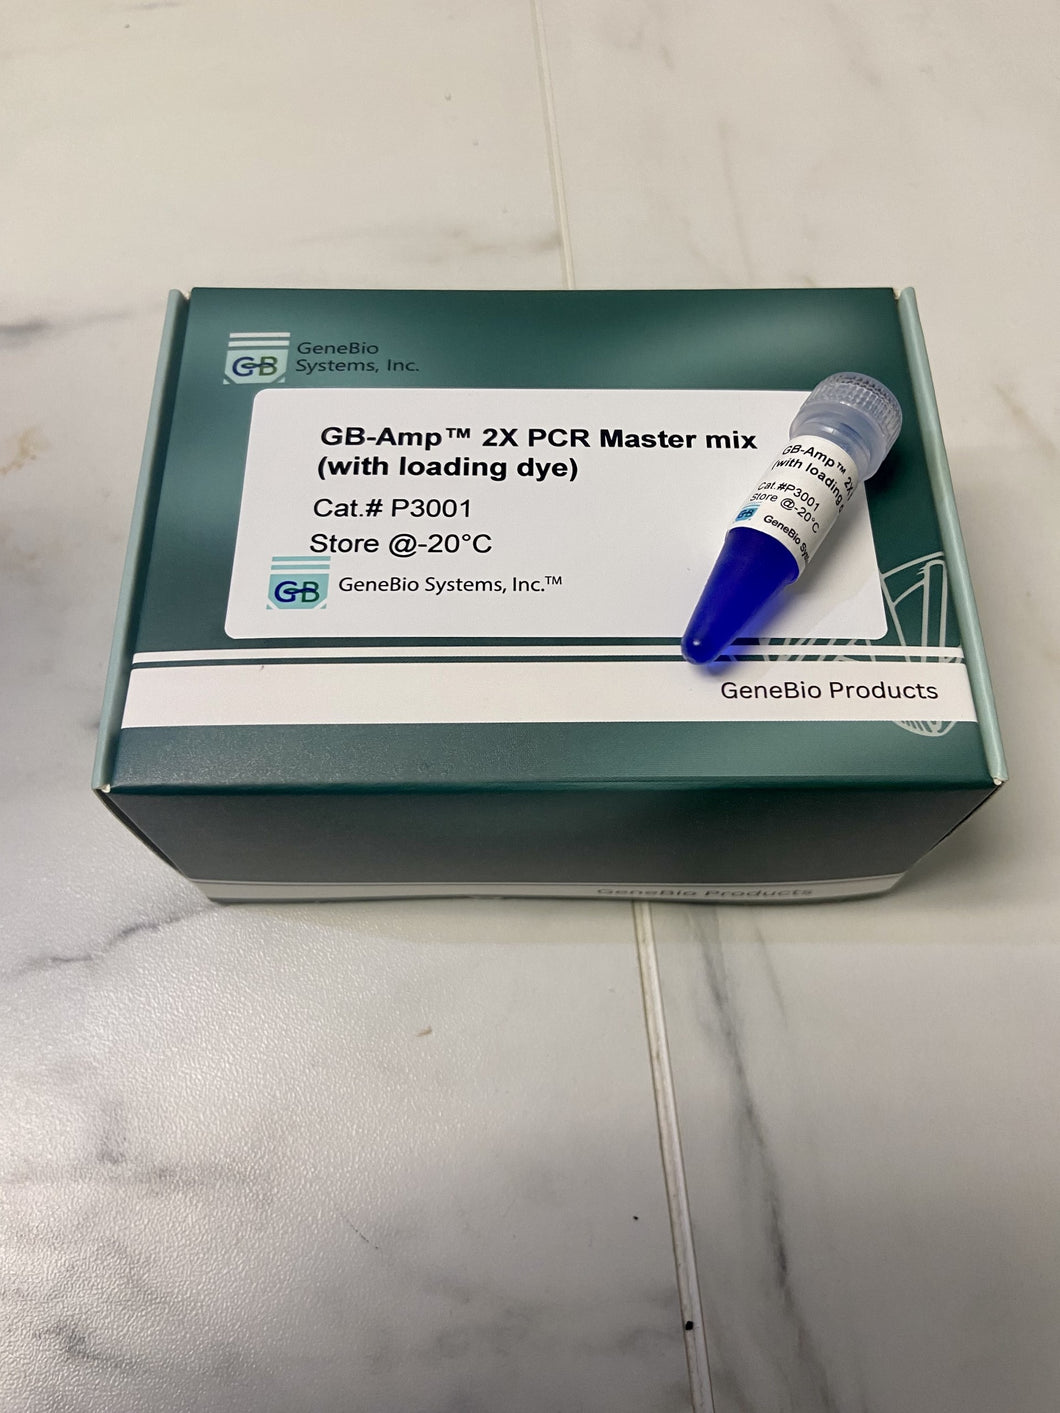 GB-Amp™ 2X PCR Master mix (with loading dye)